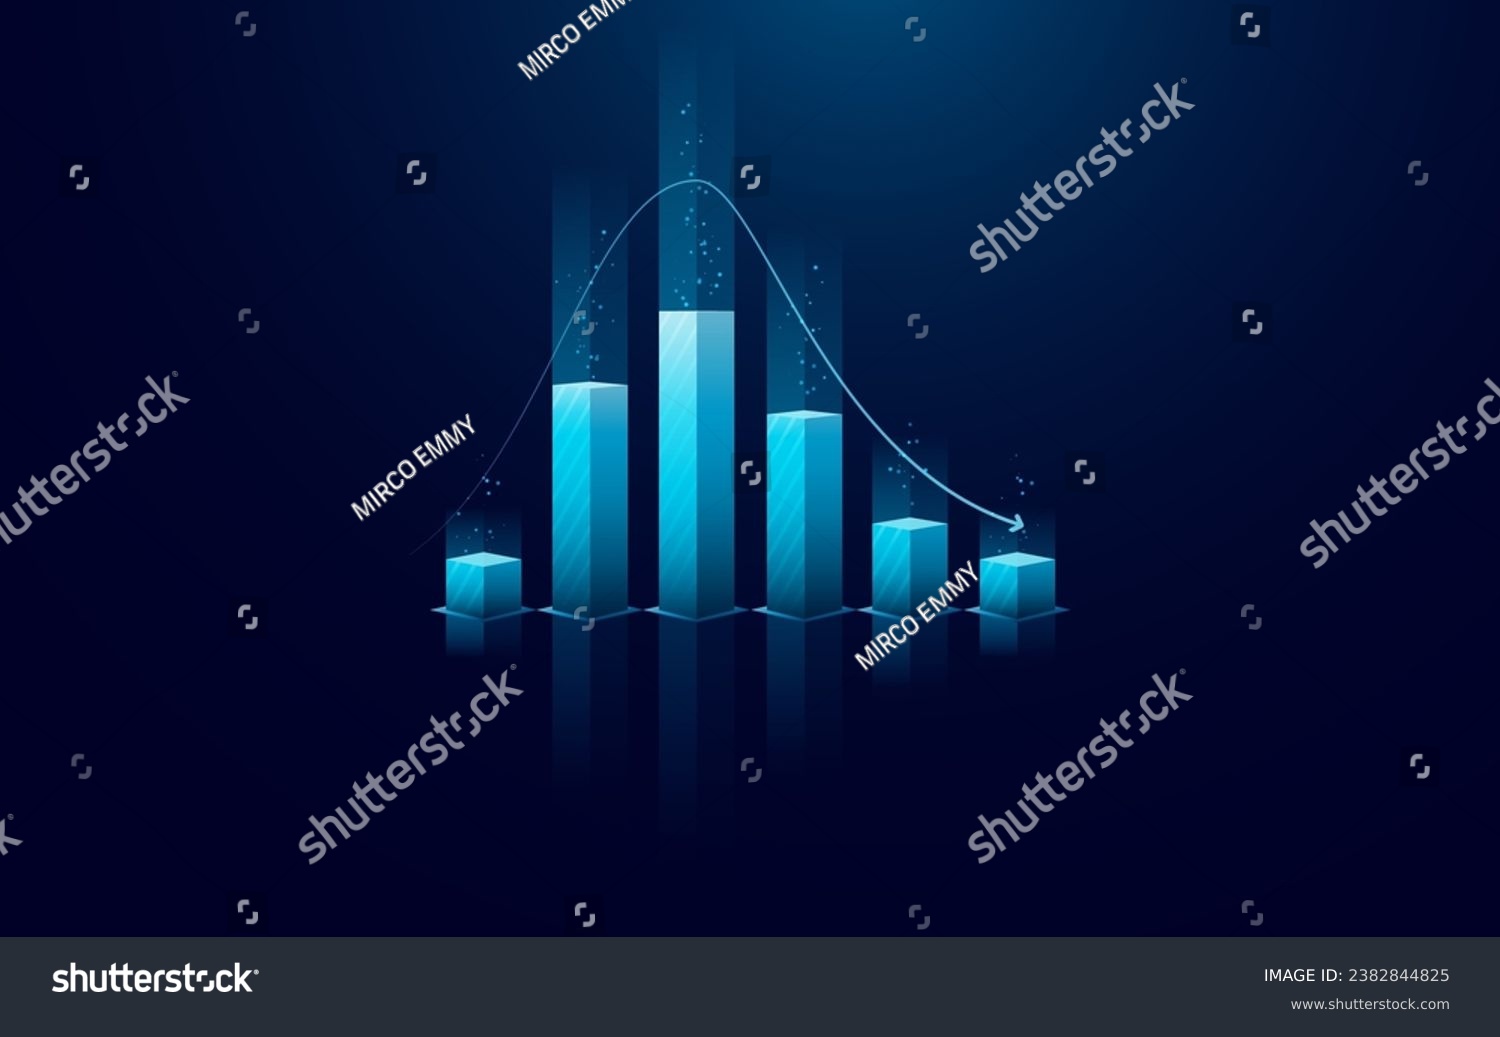 SVG of Abstract going down chart with arrow on technology dark blue background. Stock market and business concept. Vector illustration in digital futuristic light blue monochrome style. svg